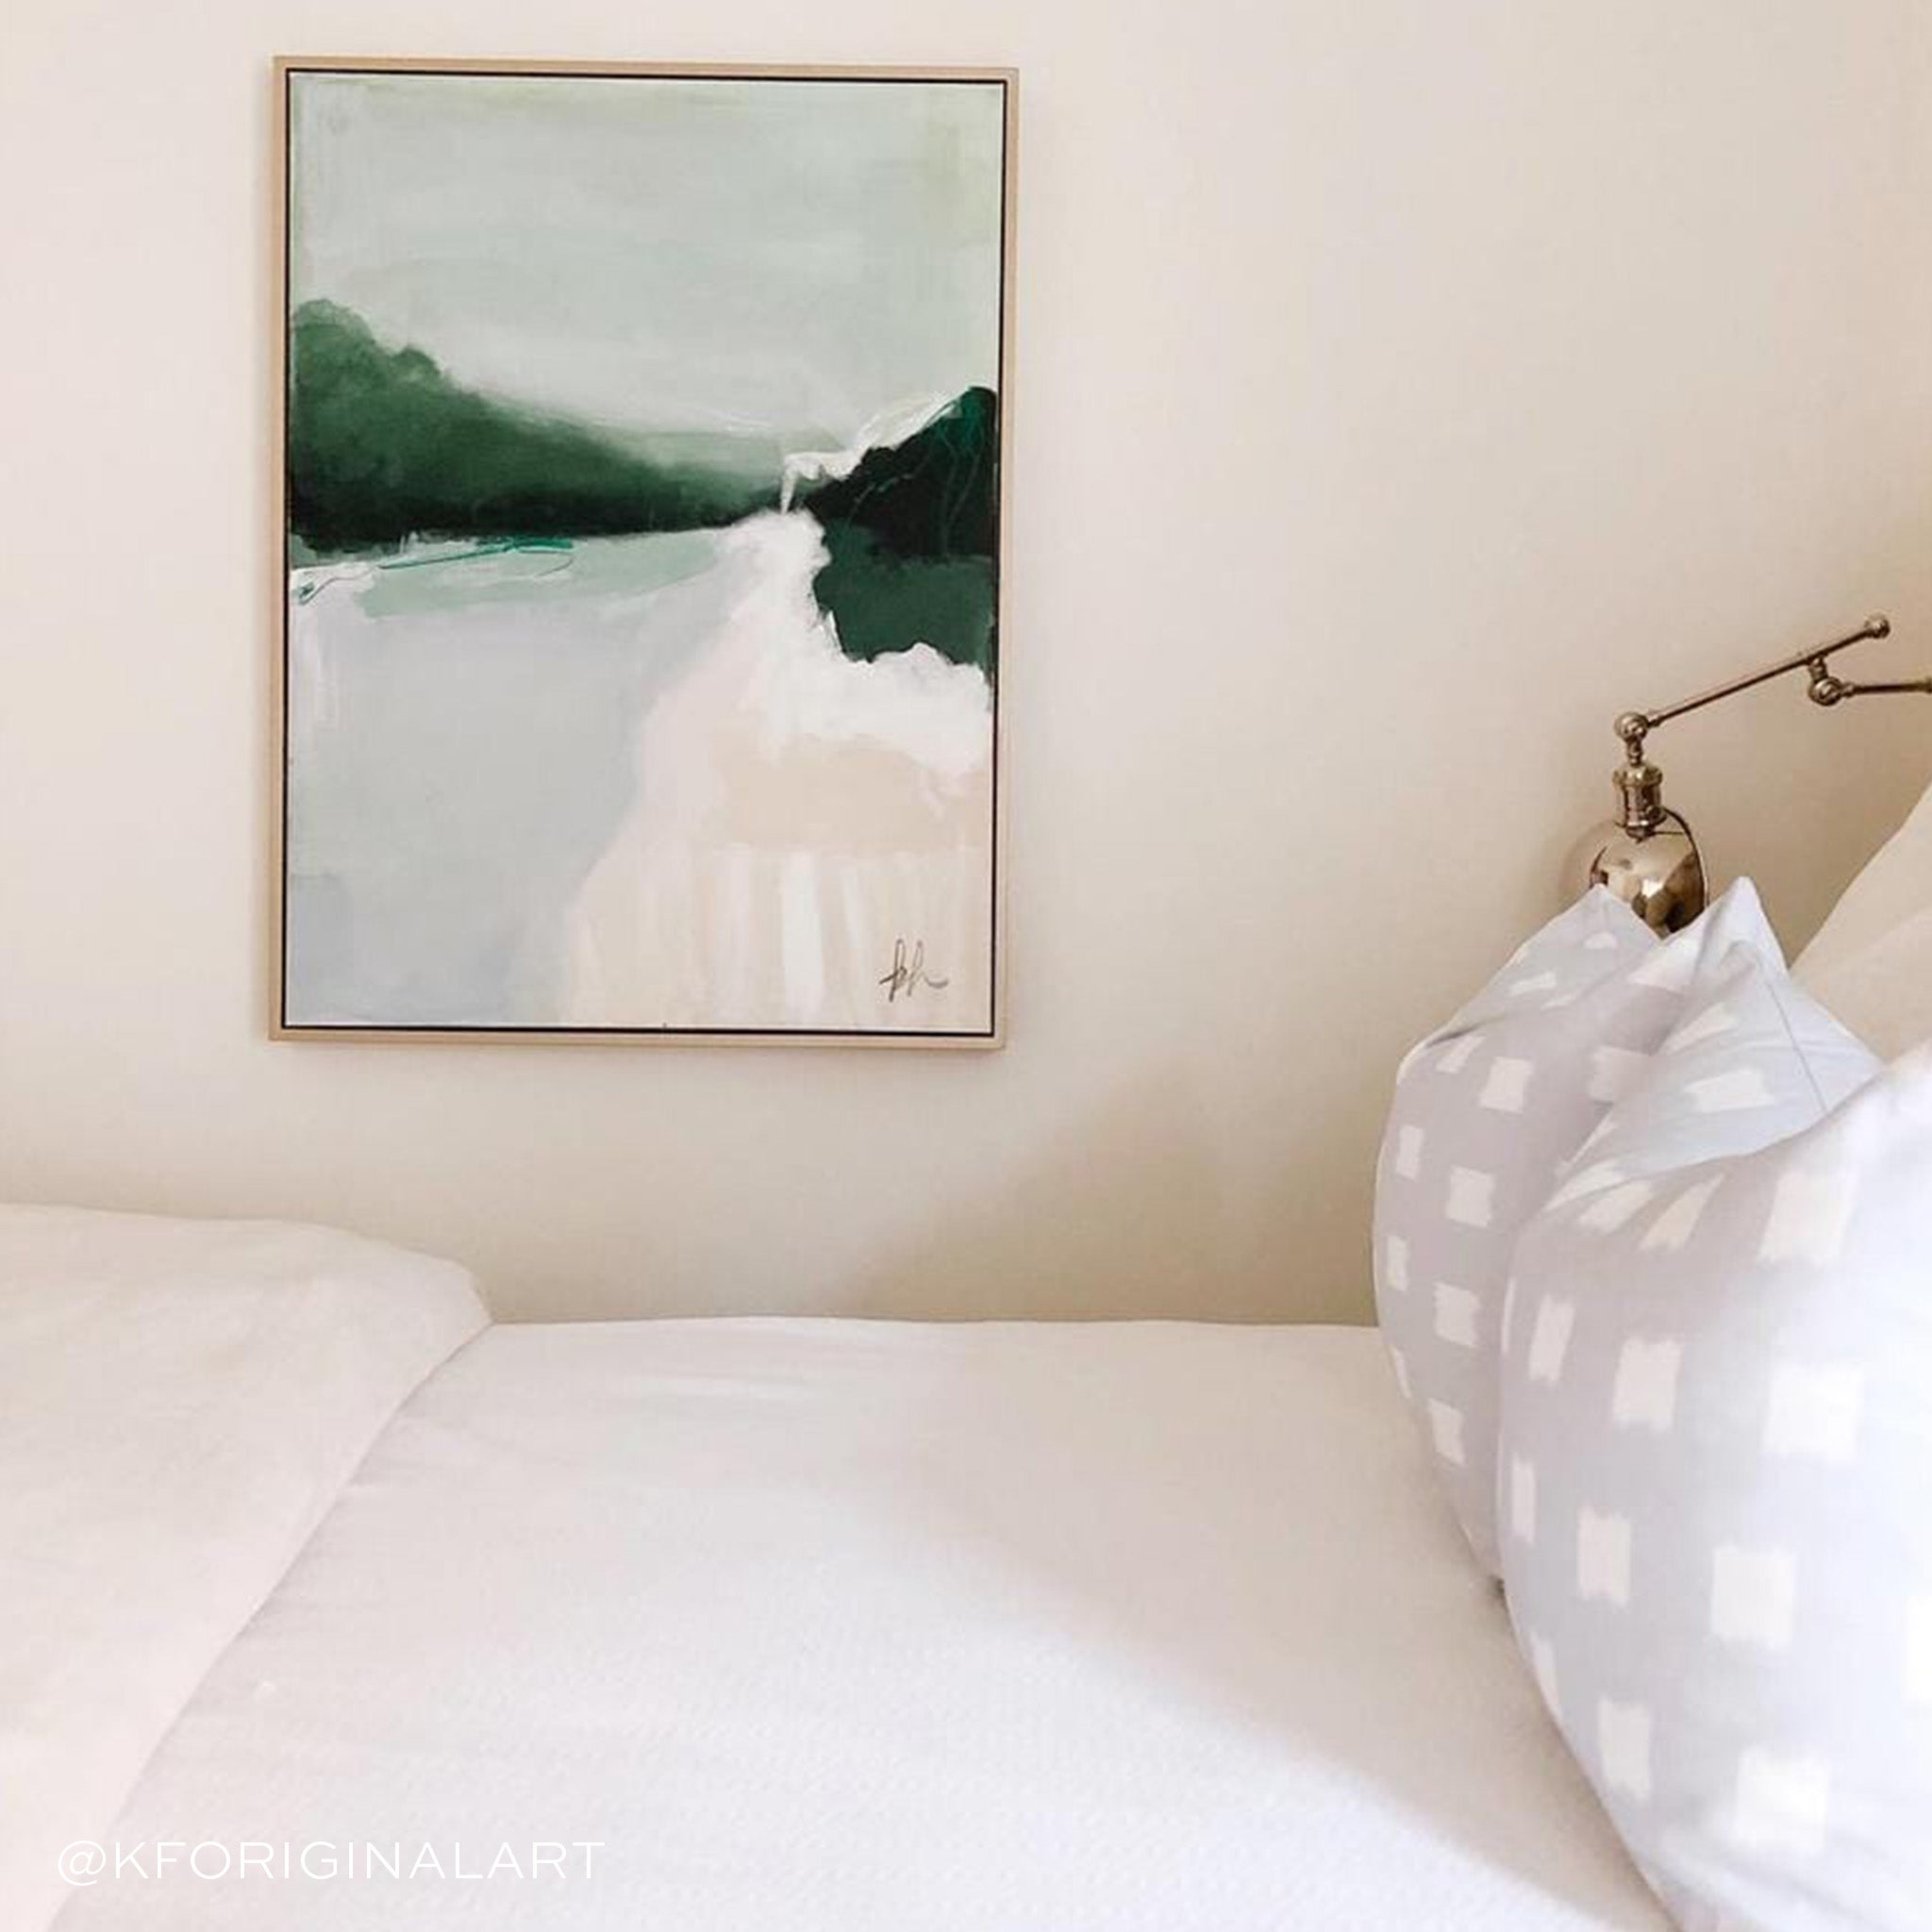 Bedroom styled with two Sky Blue Pattern printed pillows on white bed with the back having a landscape painting to the left and silver lamp on the right. Photo taken by @KFORIGINALART